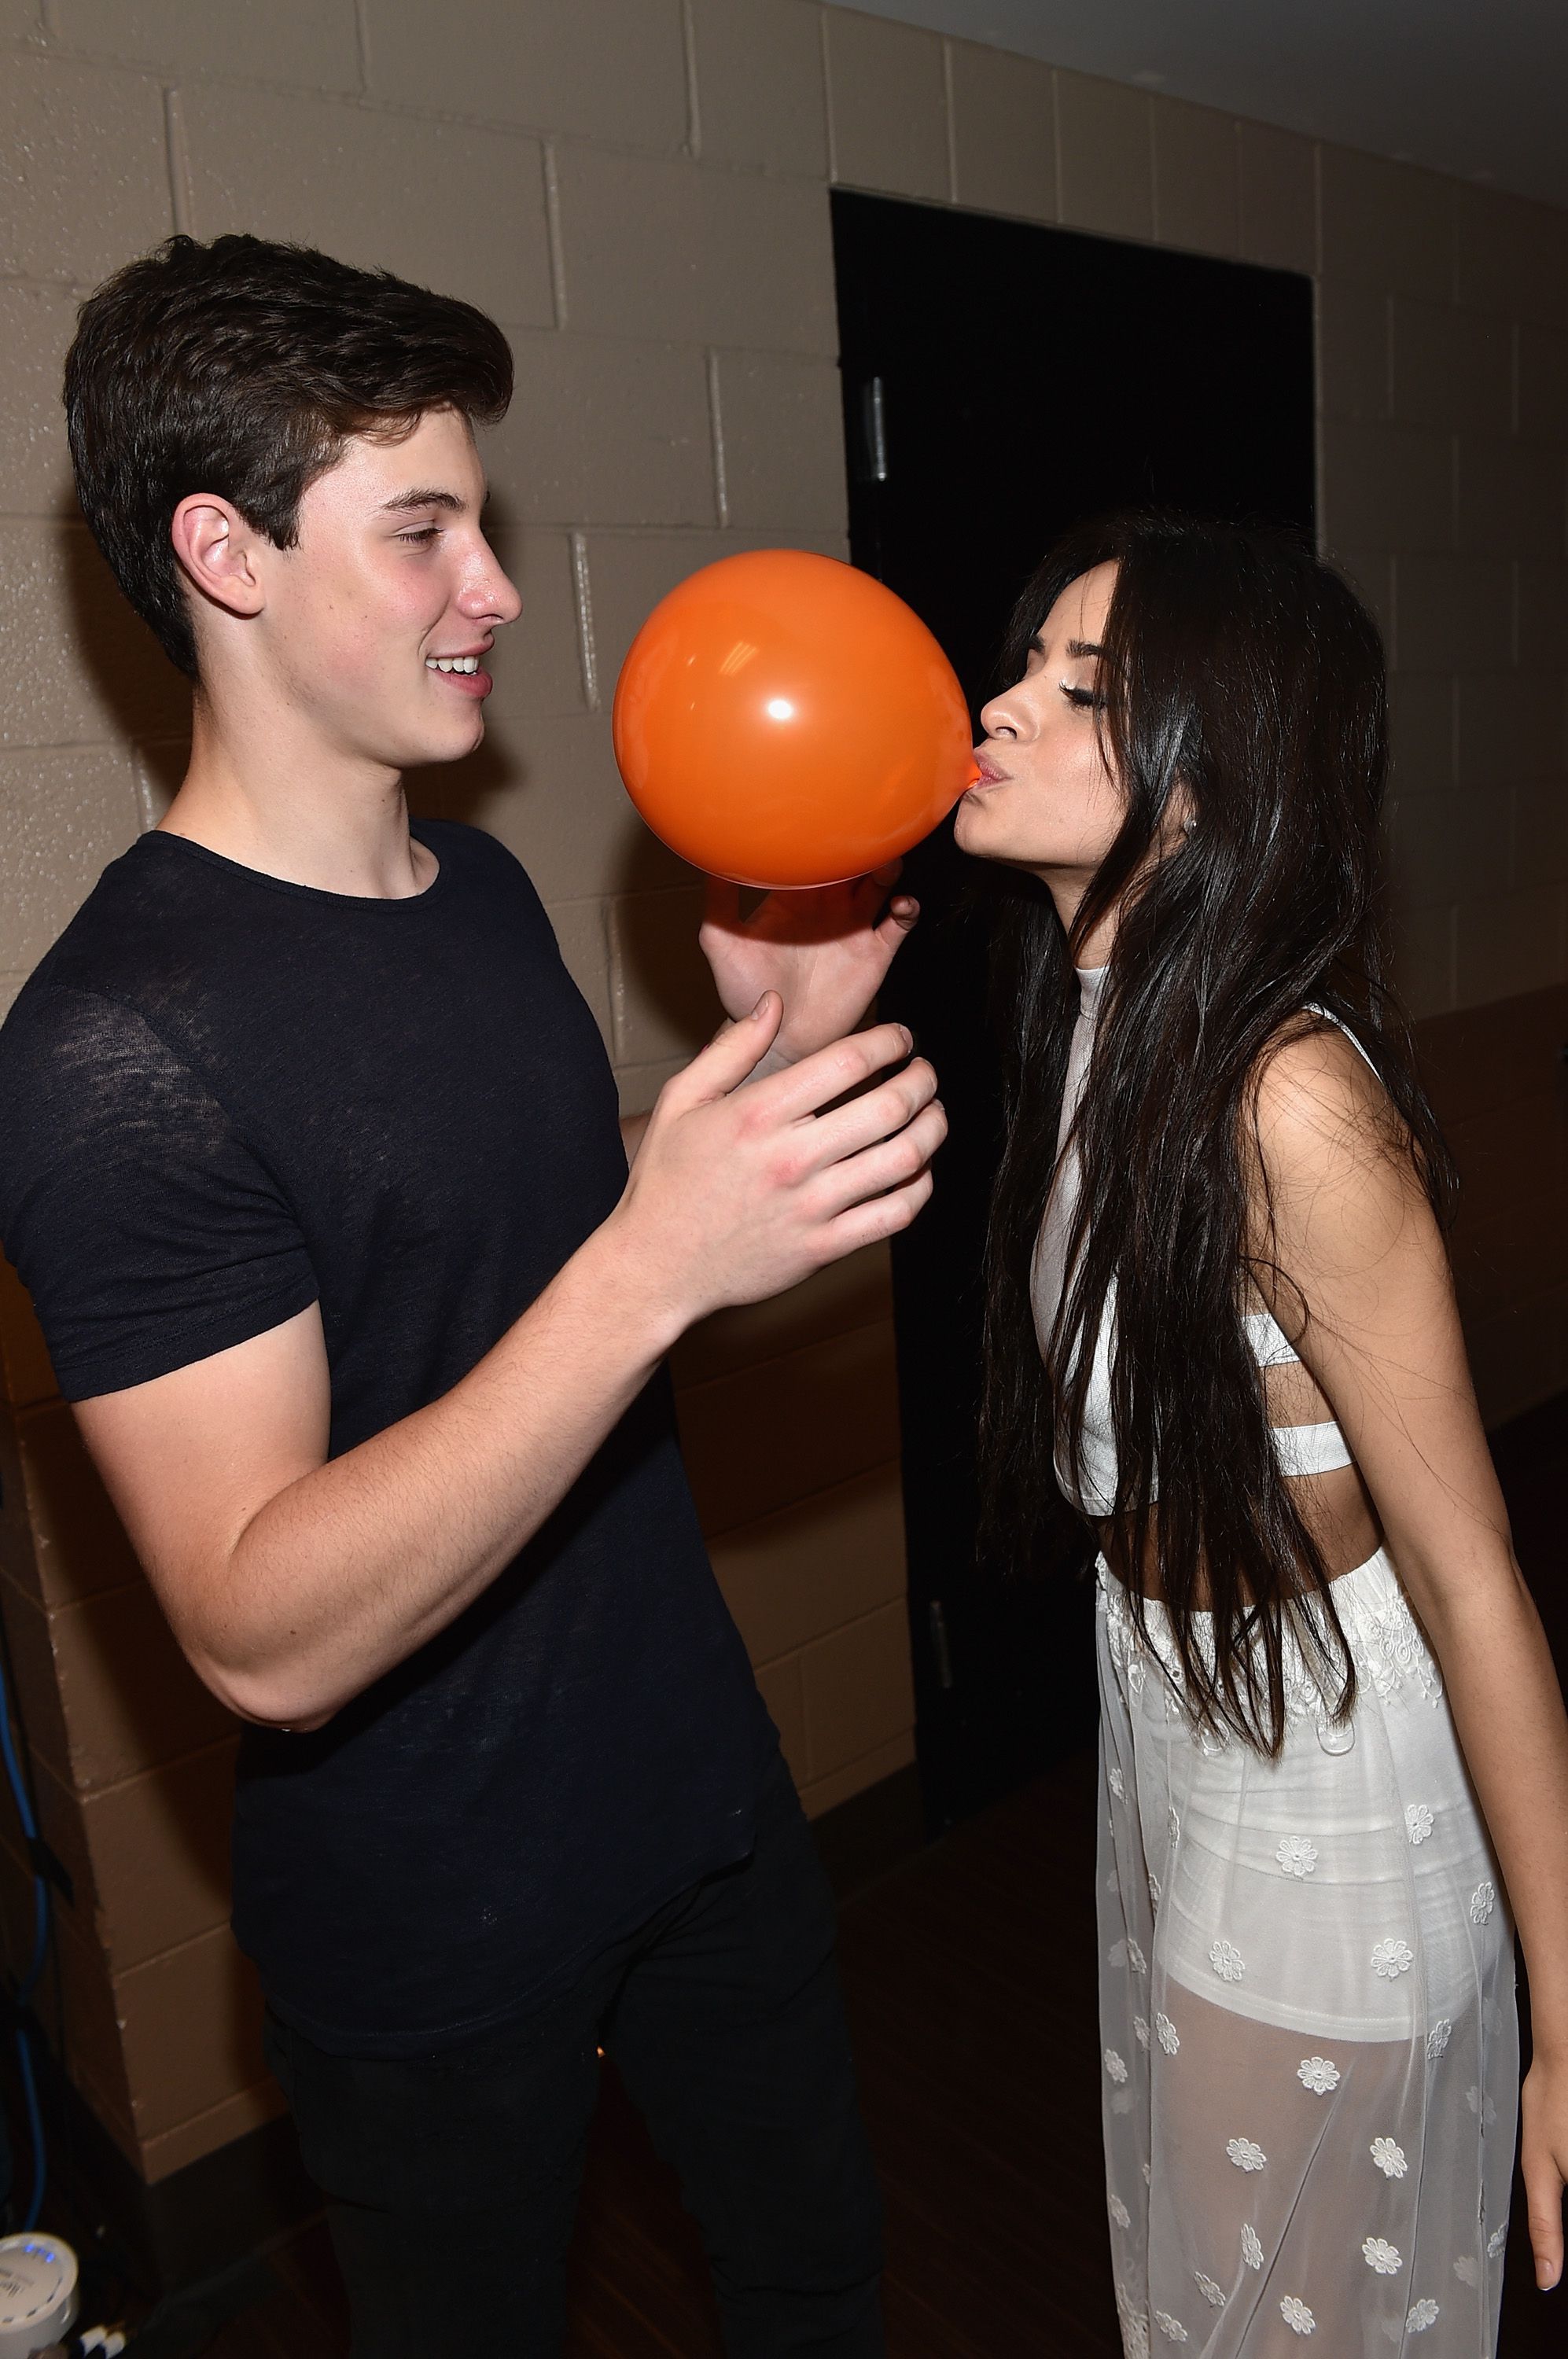 Times Shawn Mendes And Camila Cabello Looked Like The Most In